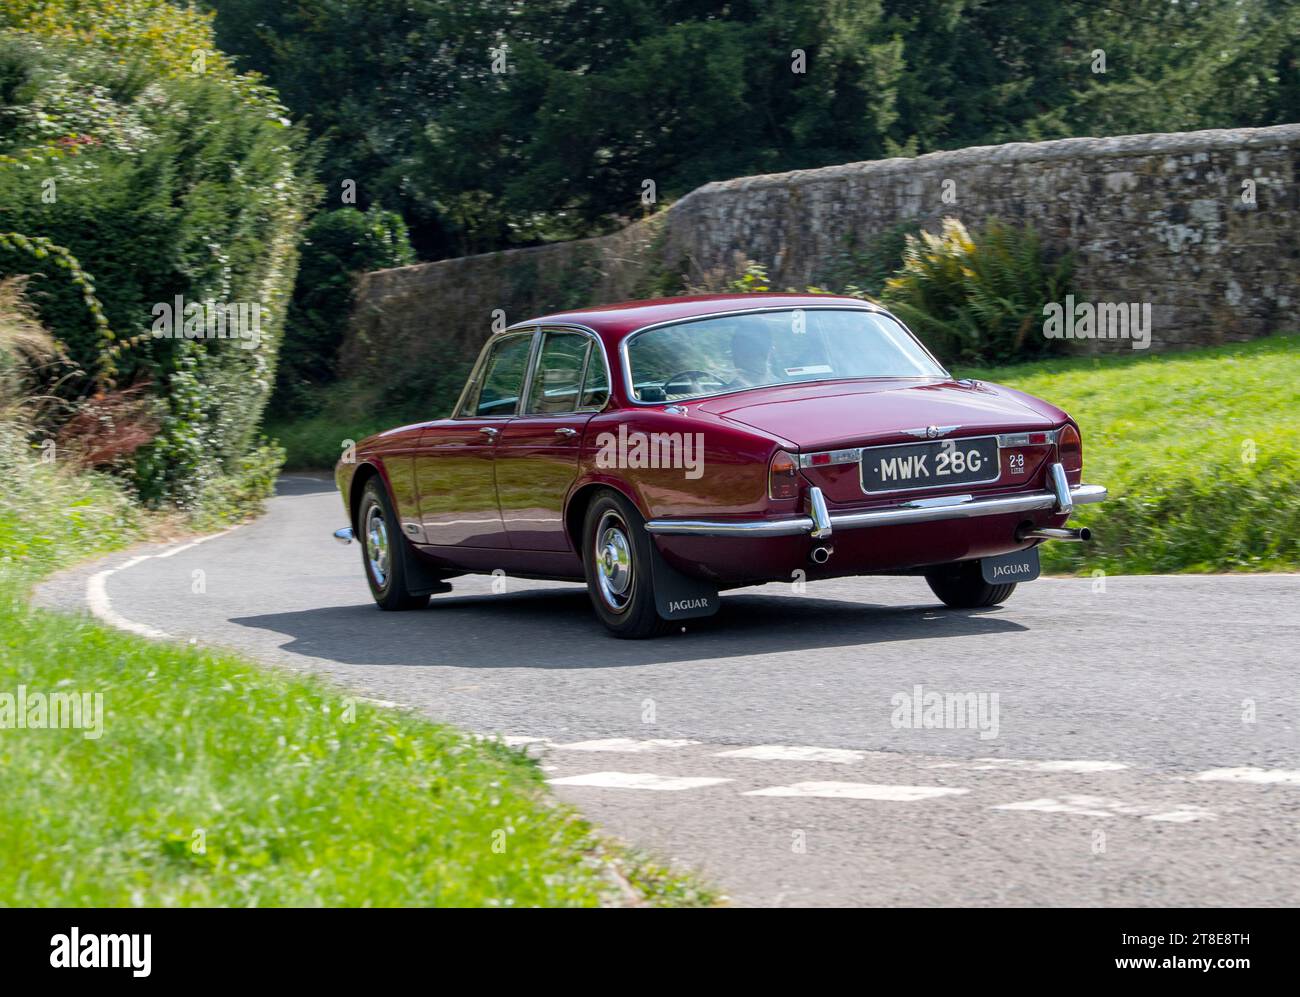 MWK 28G - the oldest Jaguar XJ in existence, a pre production car used press launch of the model in 1969 and then as a press demonstrator Stock Photo